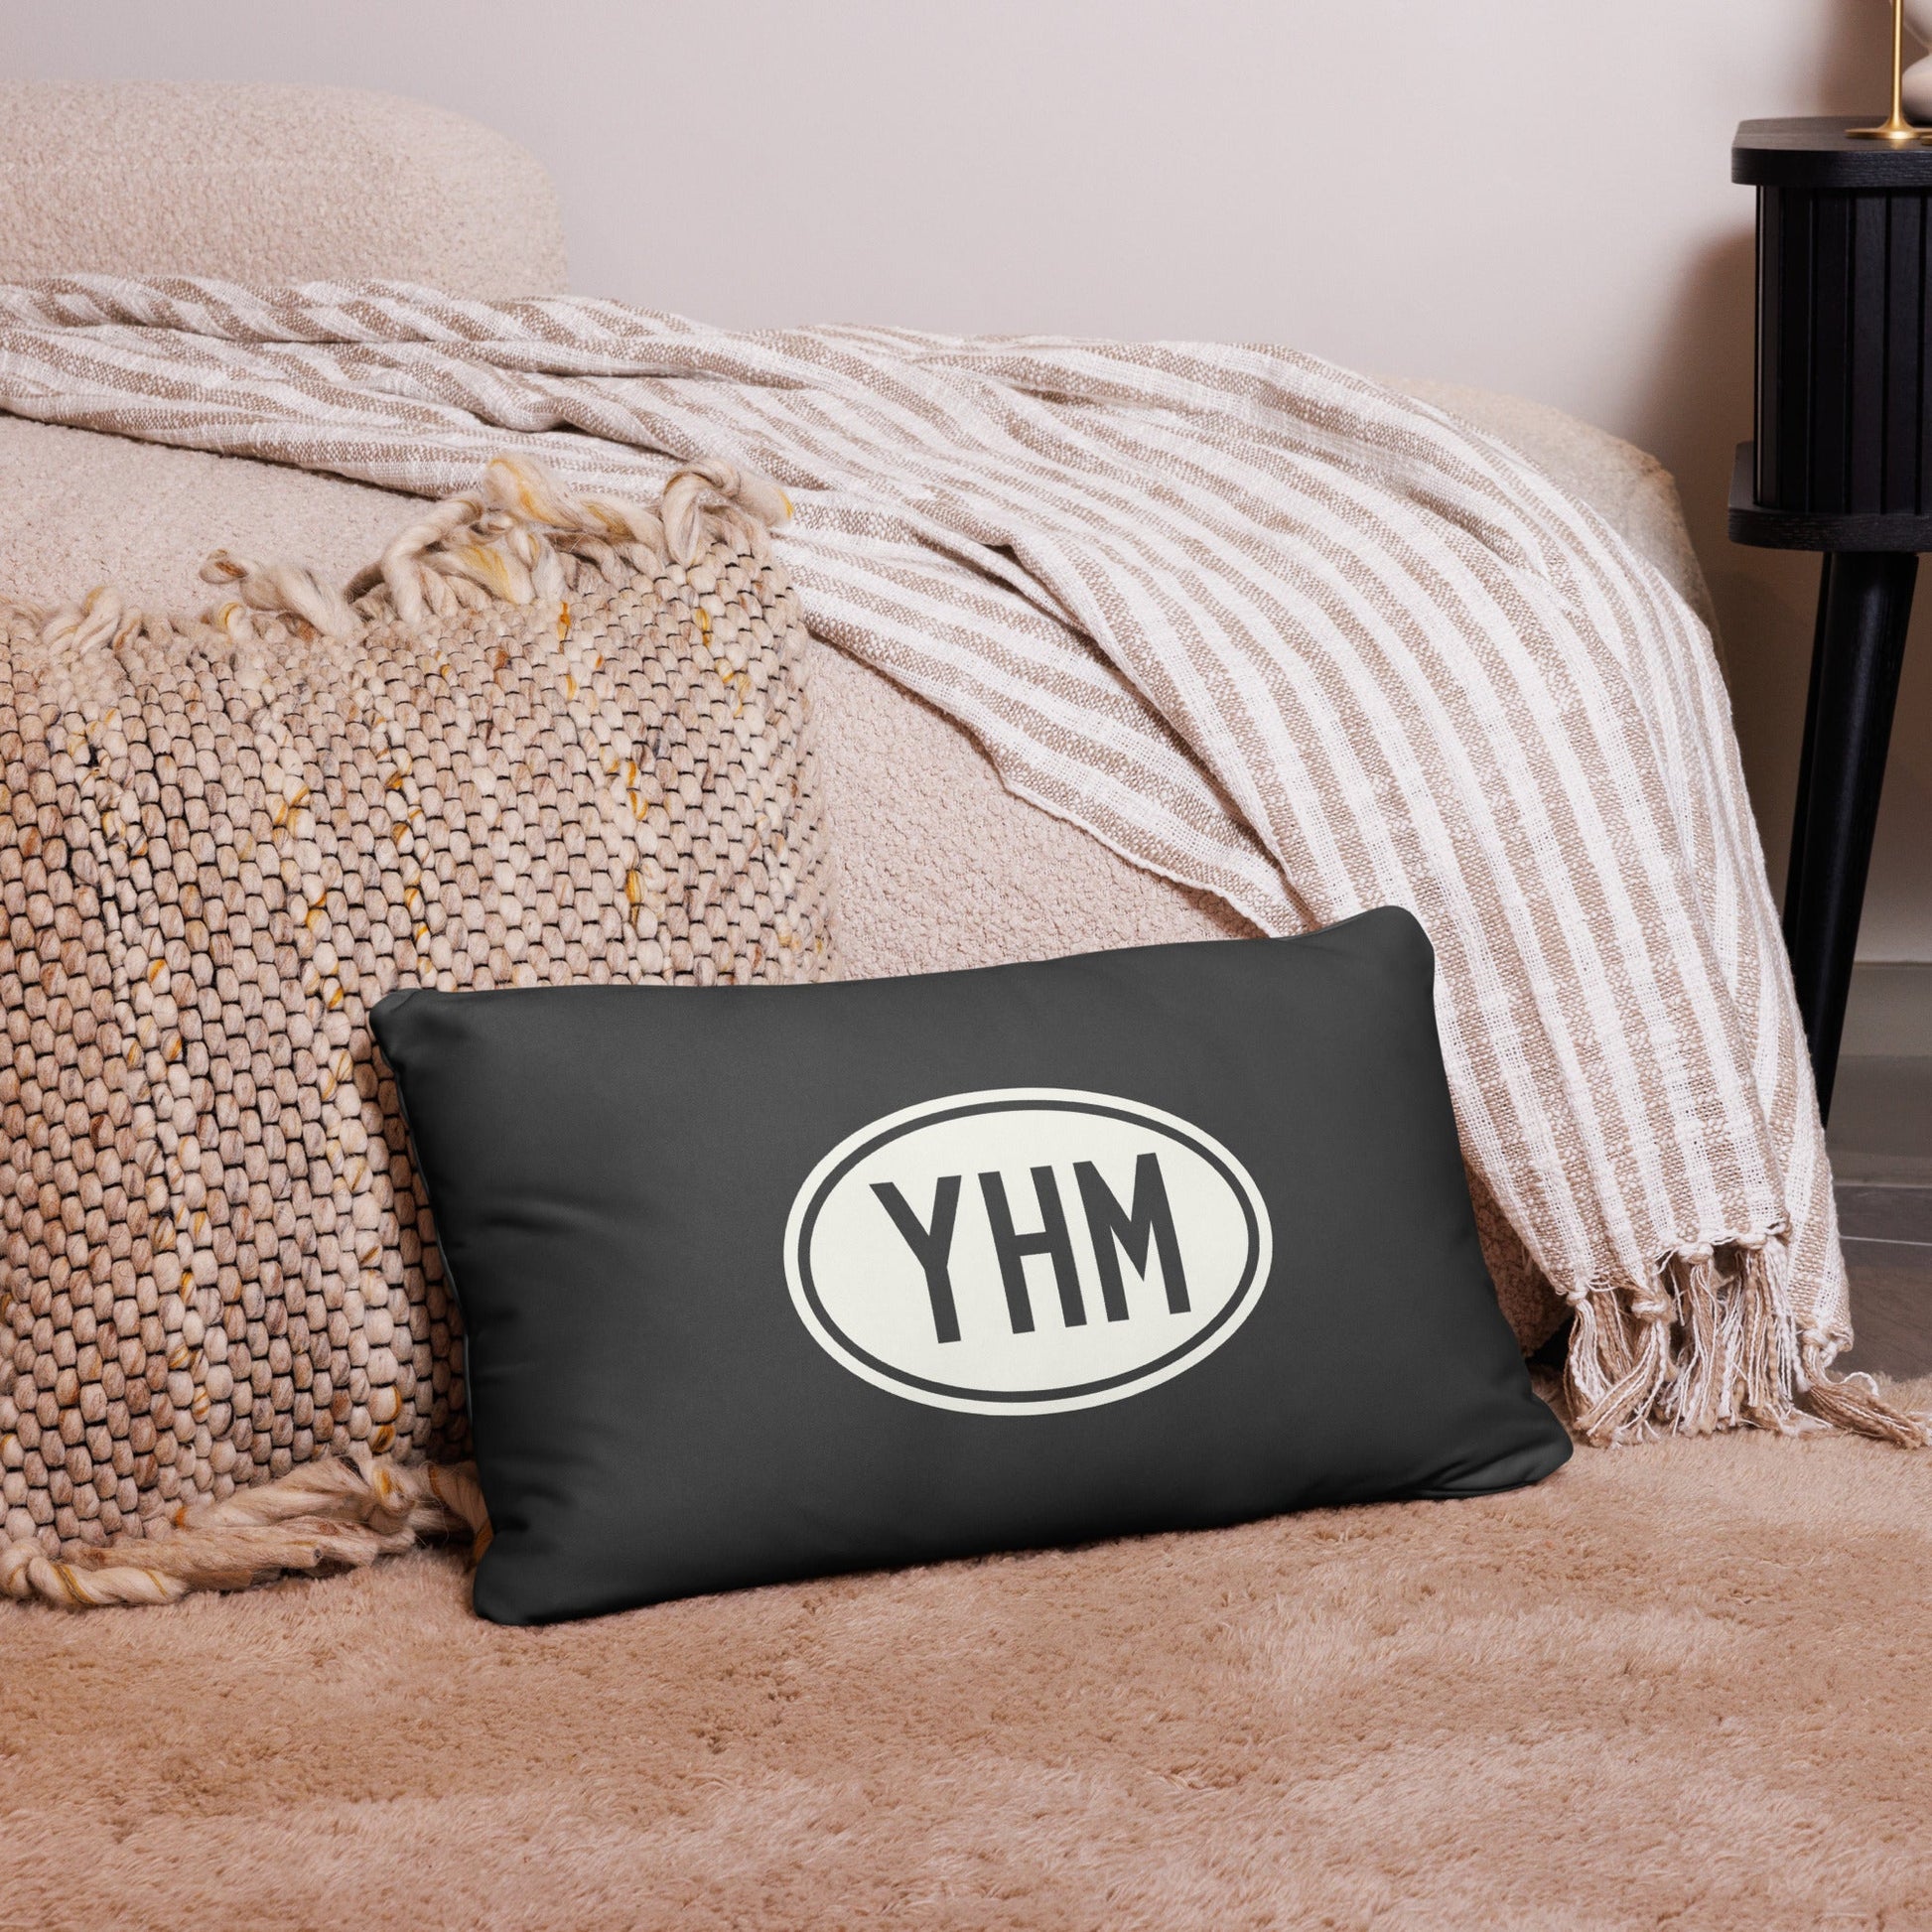 Unique Travel Gift Throw Pillow - White Oval • HND Tokyo • YHM Designs - Image 05